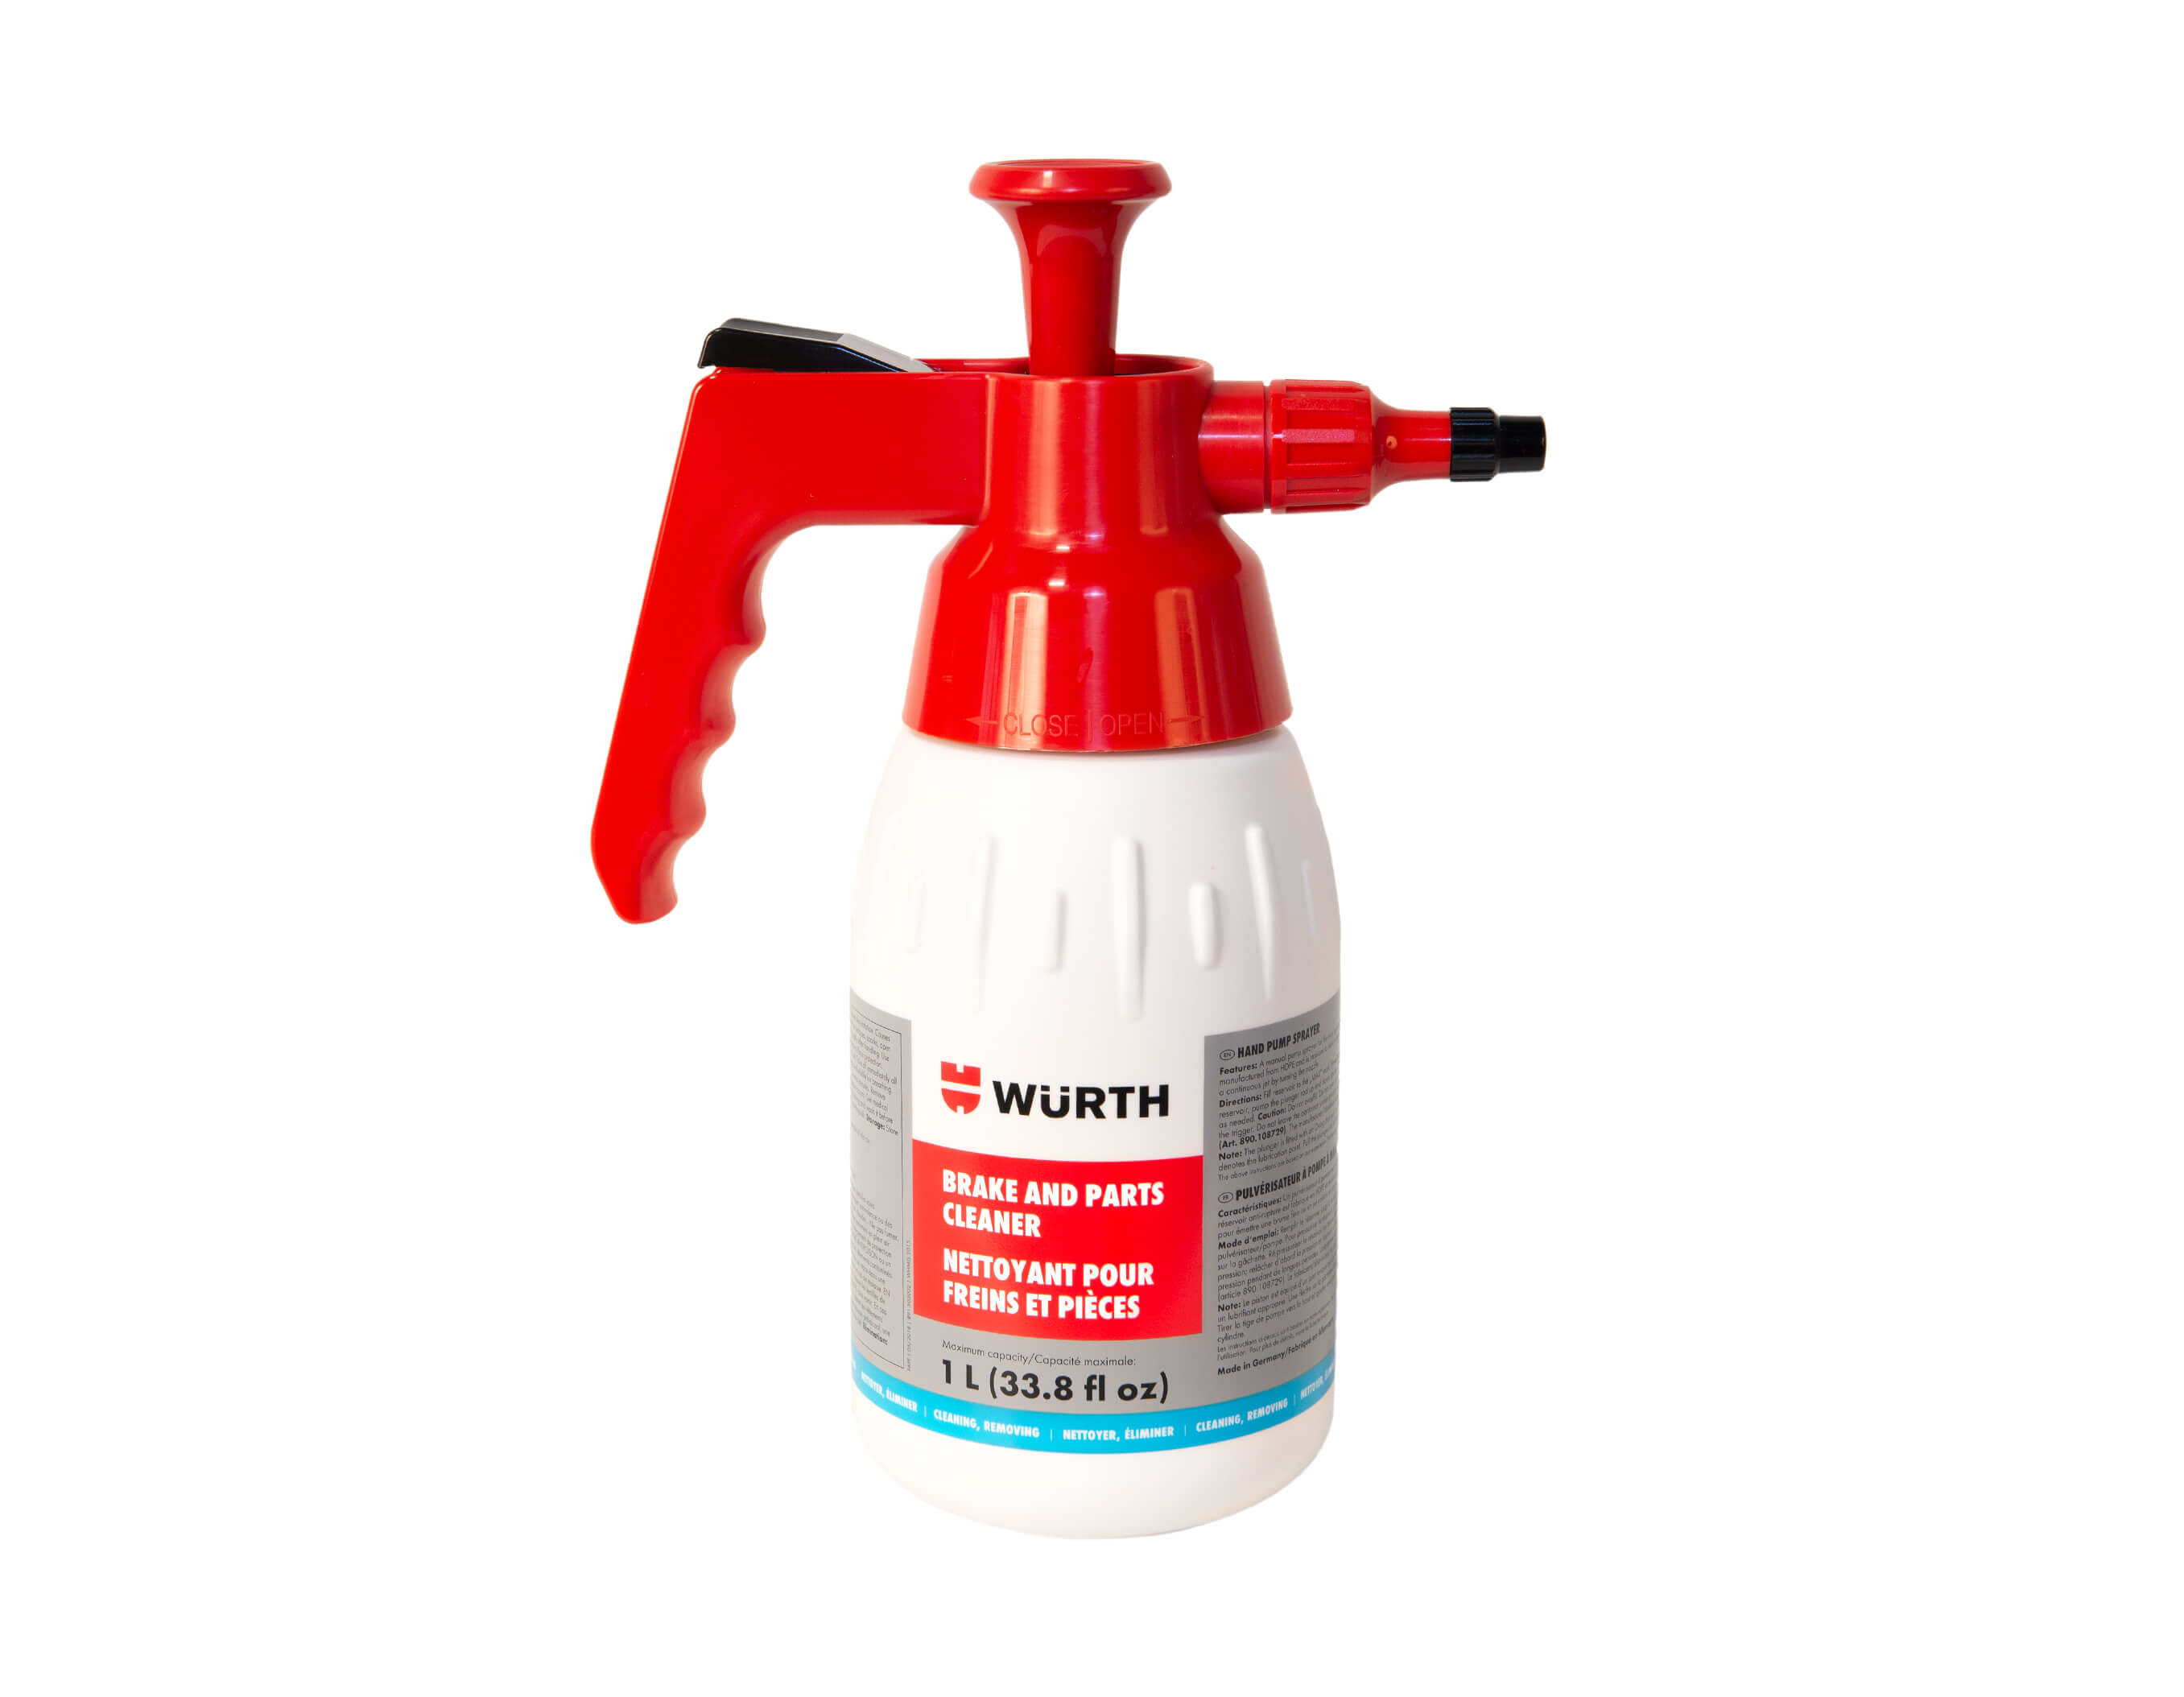 PUMP SPRAY BOTTLE FOR BRAKE AND PARTS CLEANER